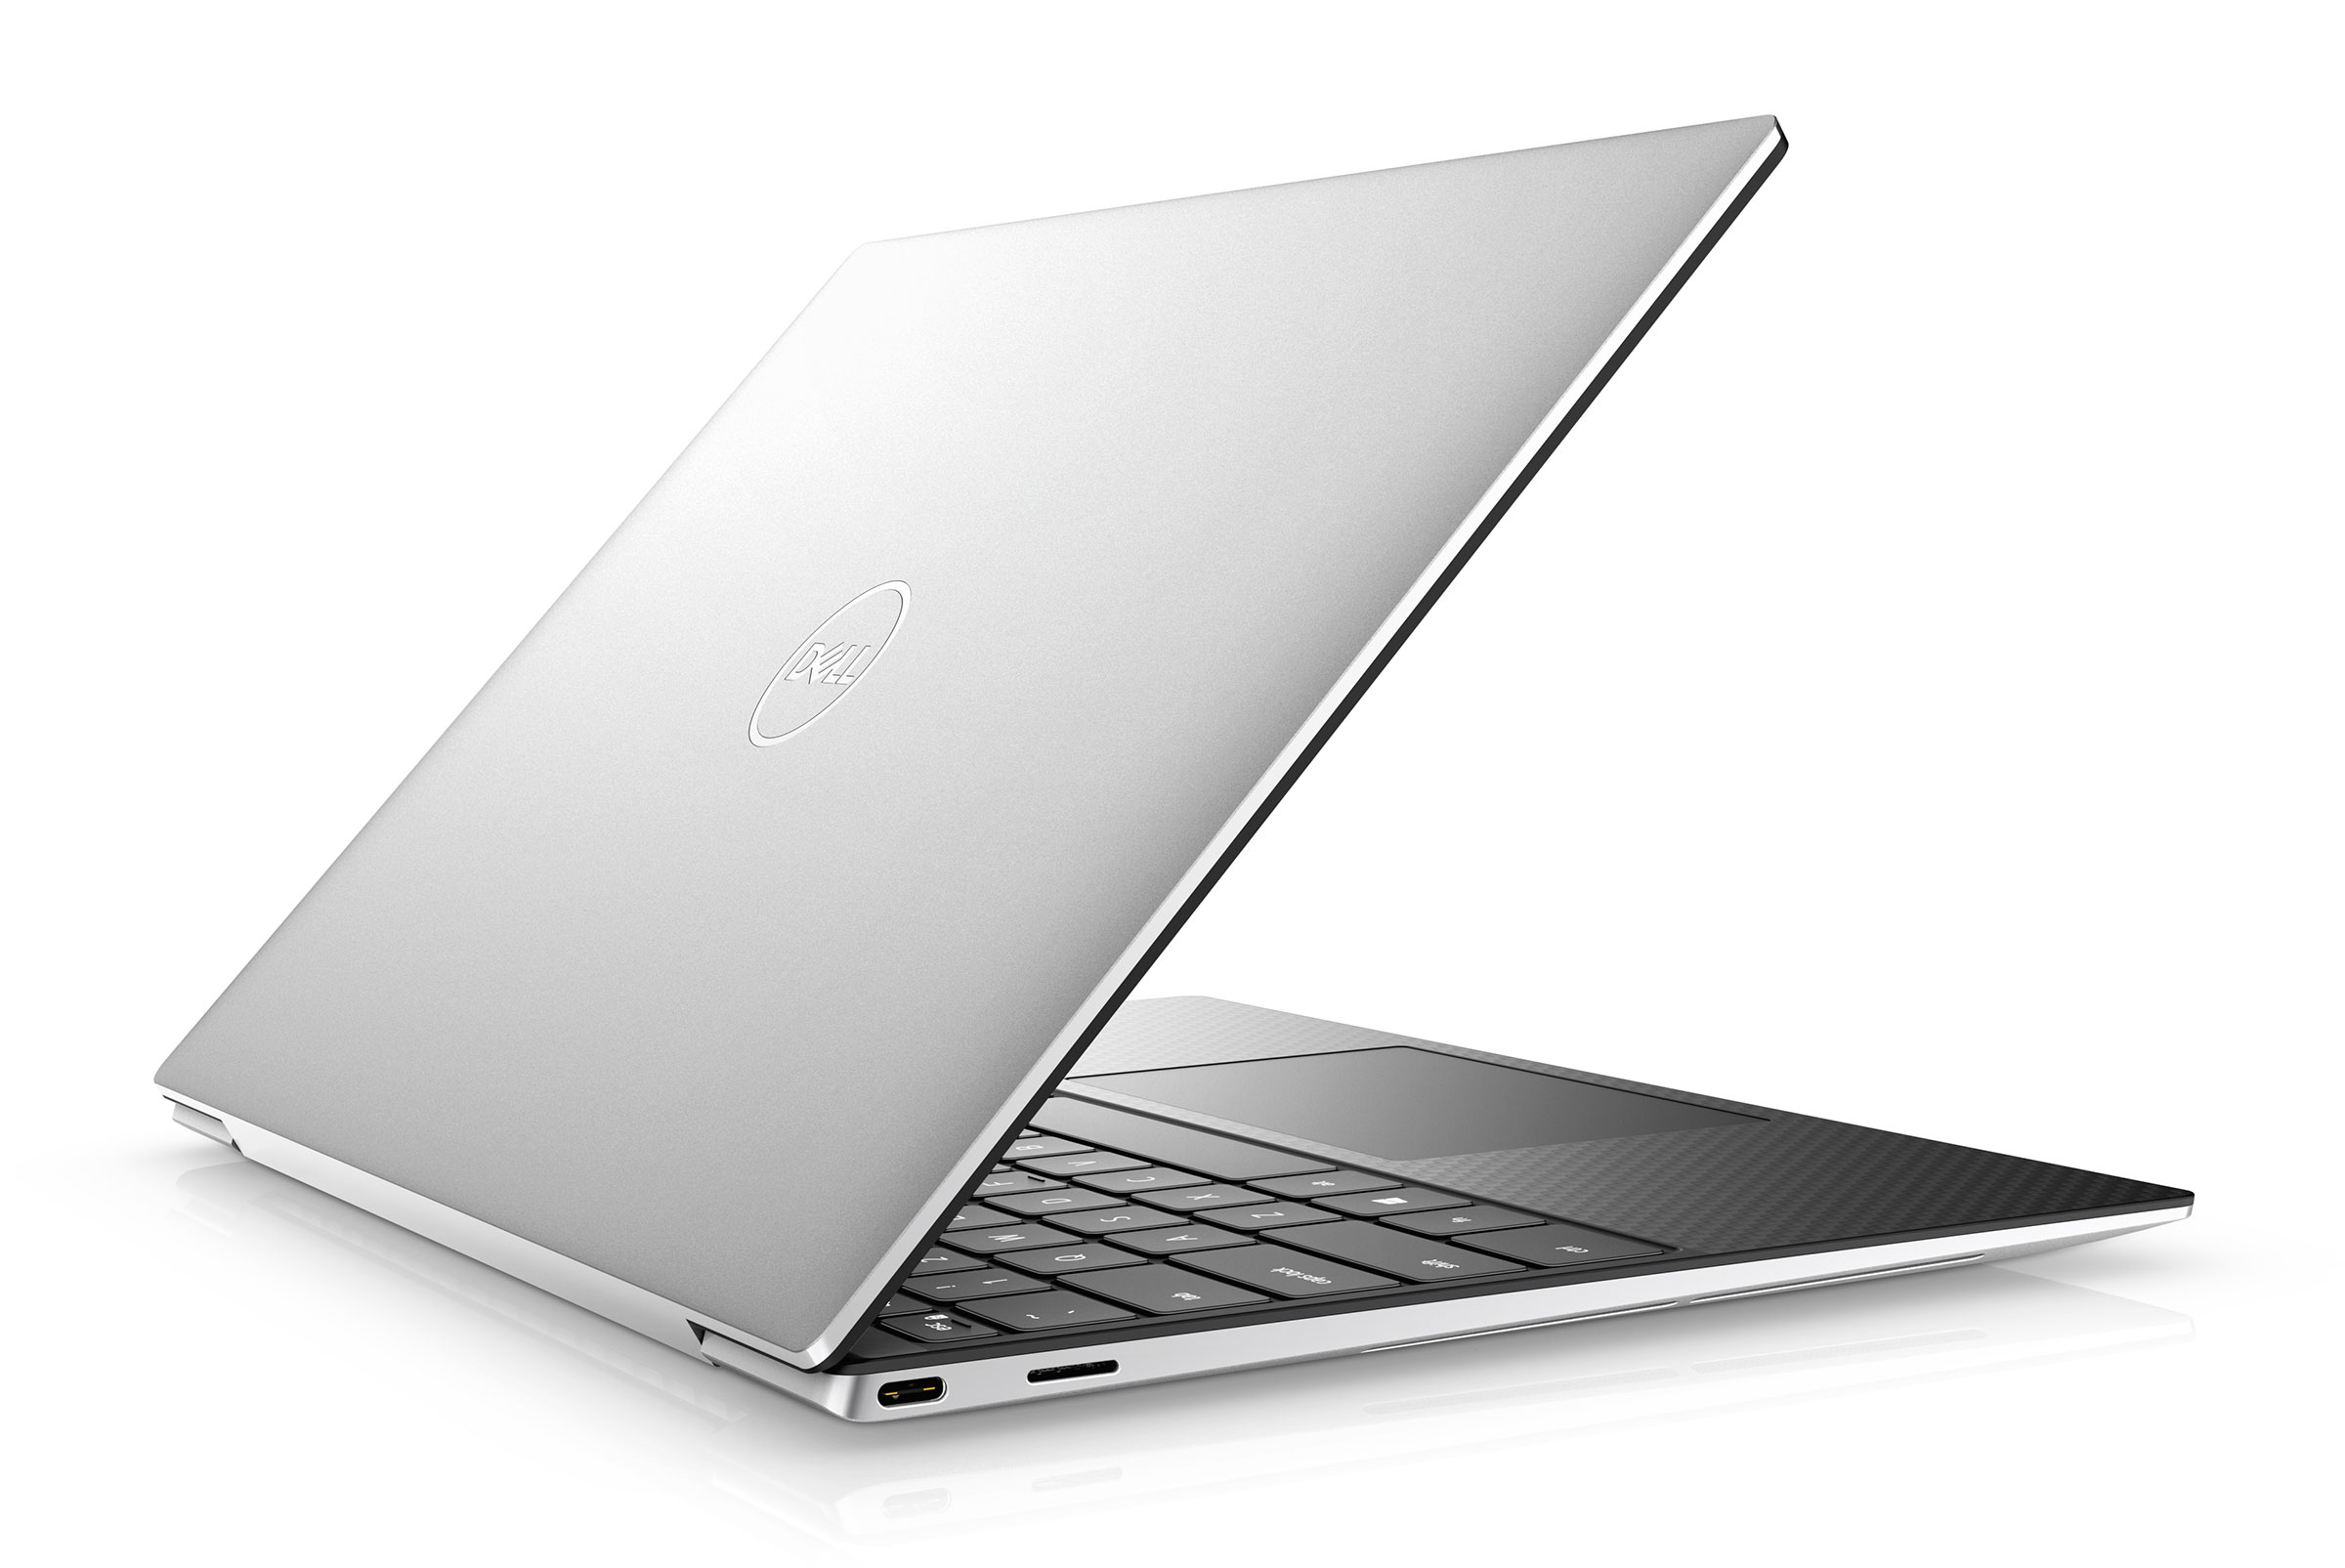 2020 xps 13 9300 - dell xps 13 9300 2020